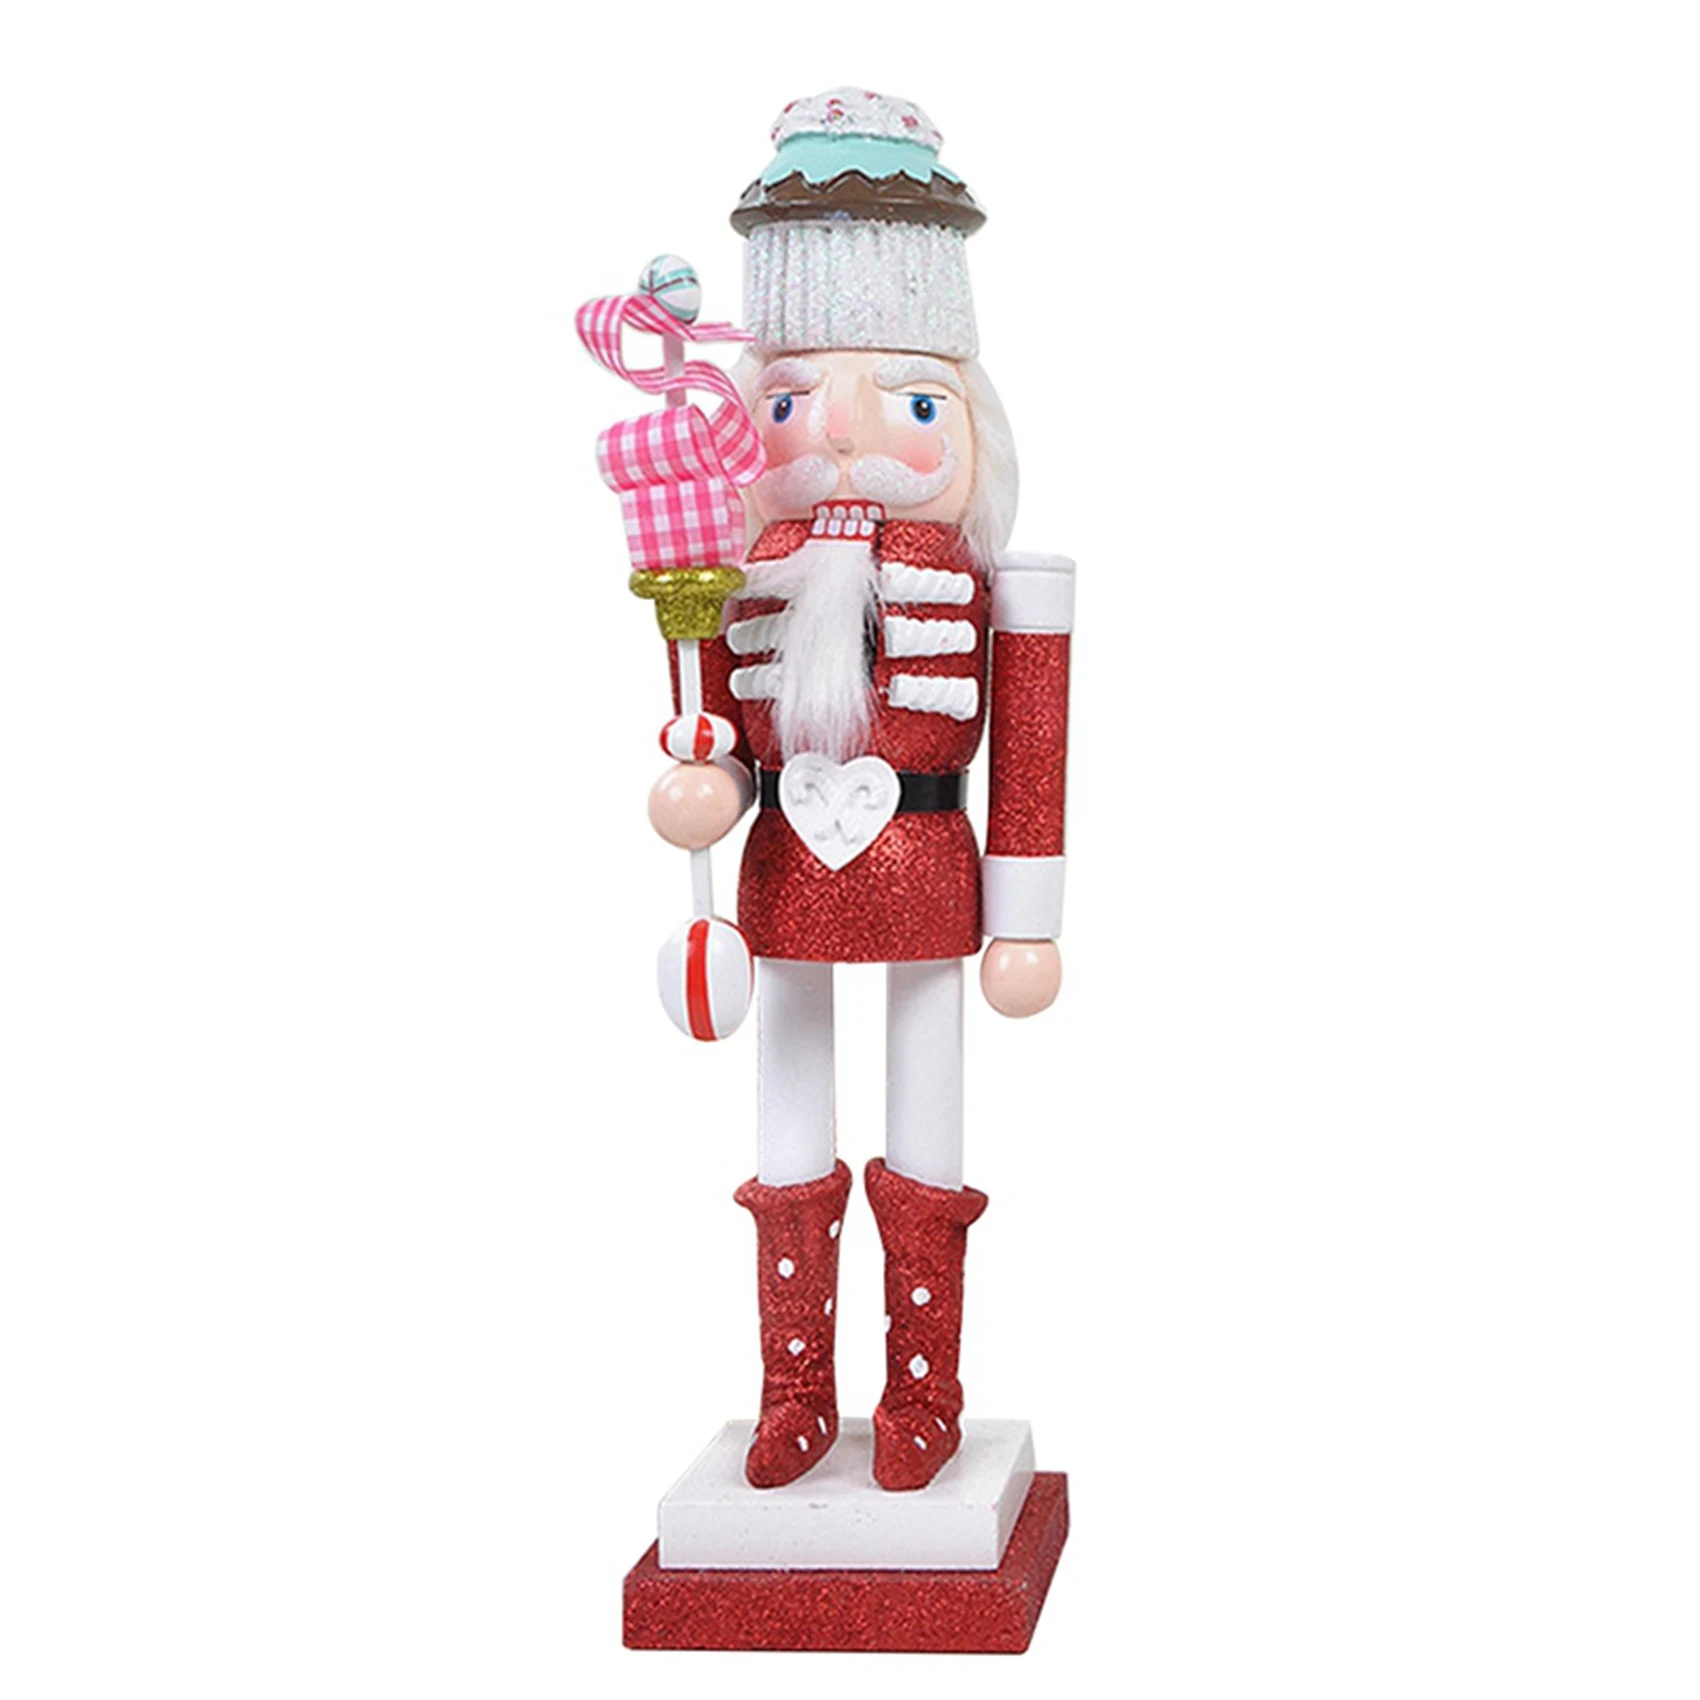 

38cm Pure Hand-Painted Cake Nutcracker Puppet Toy Desktop Crafts Kids Gifts Christmas Home Decorations A